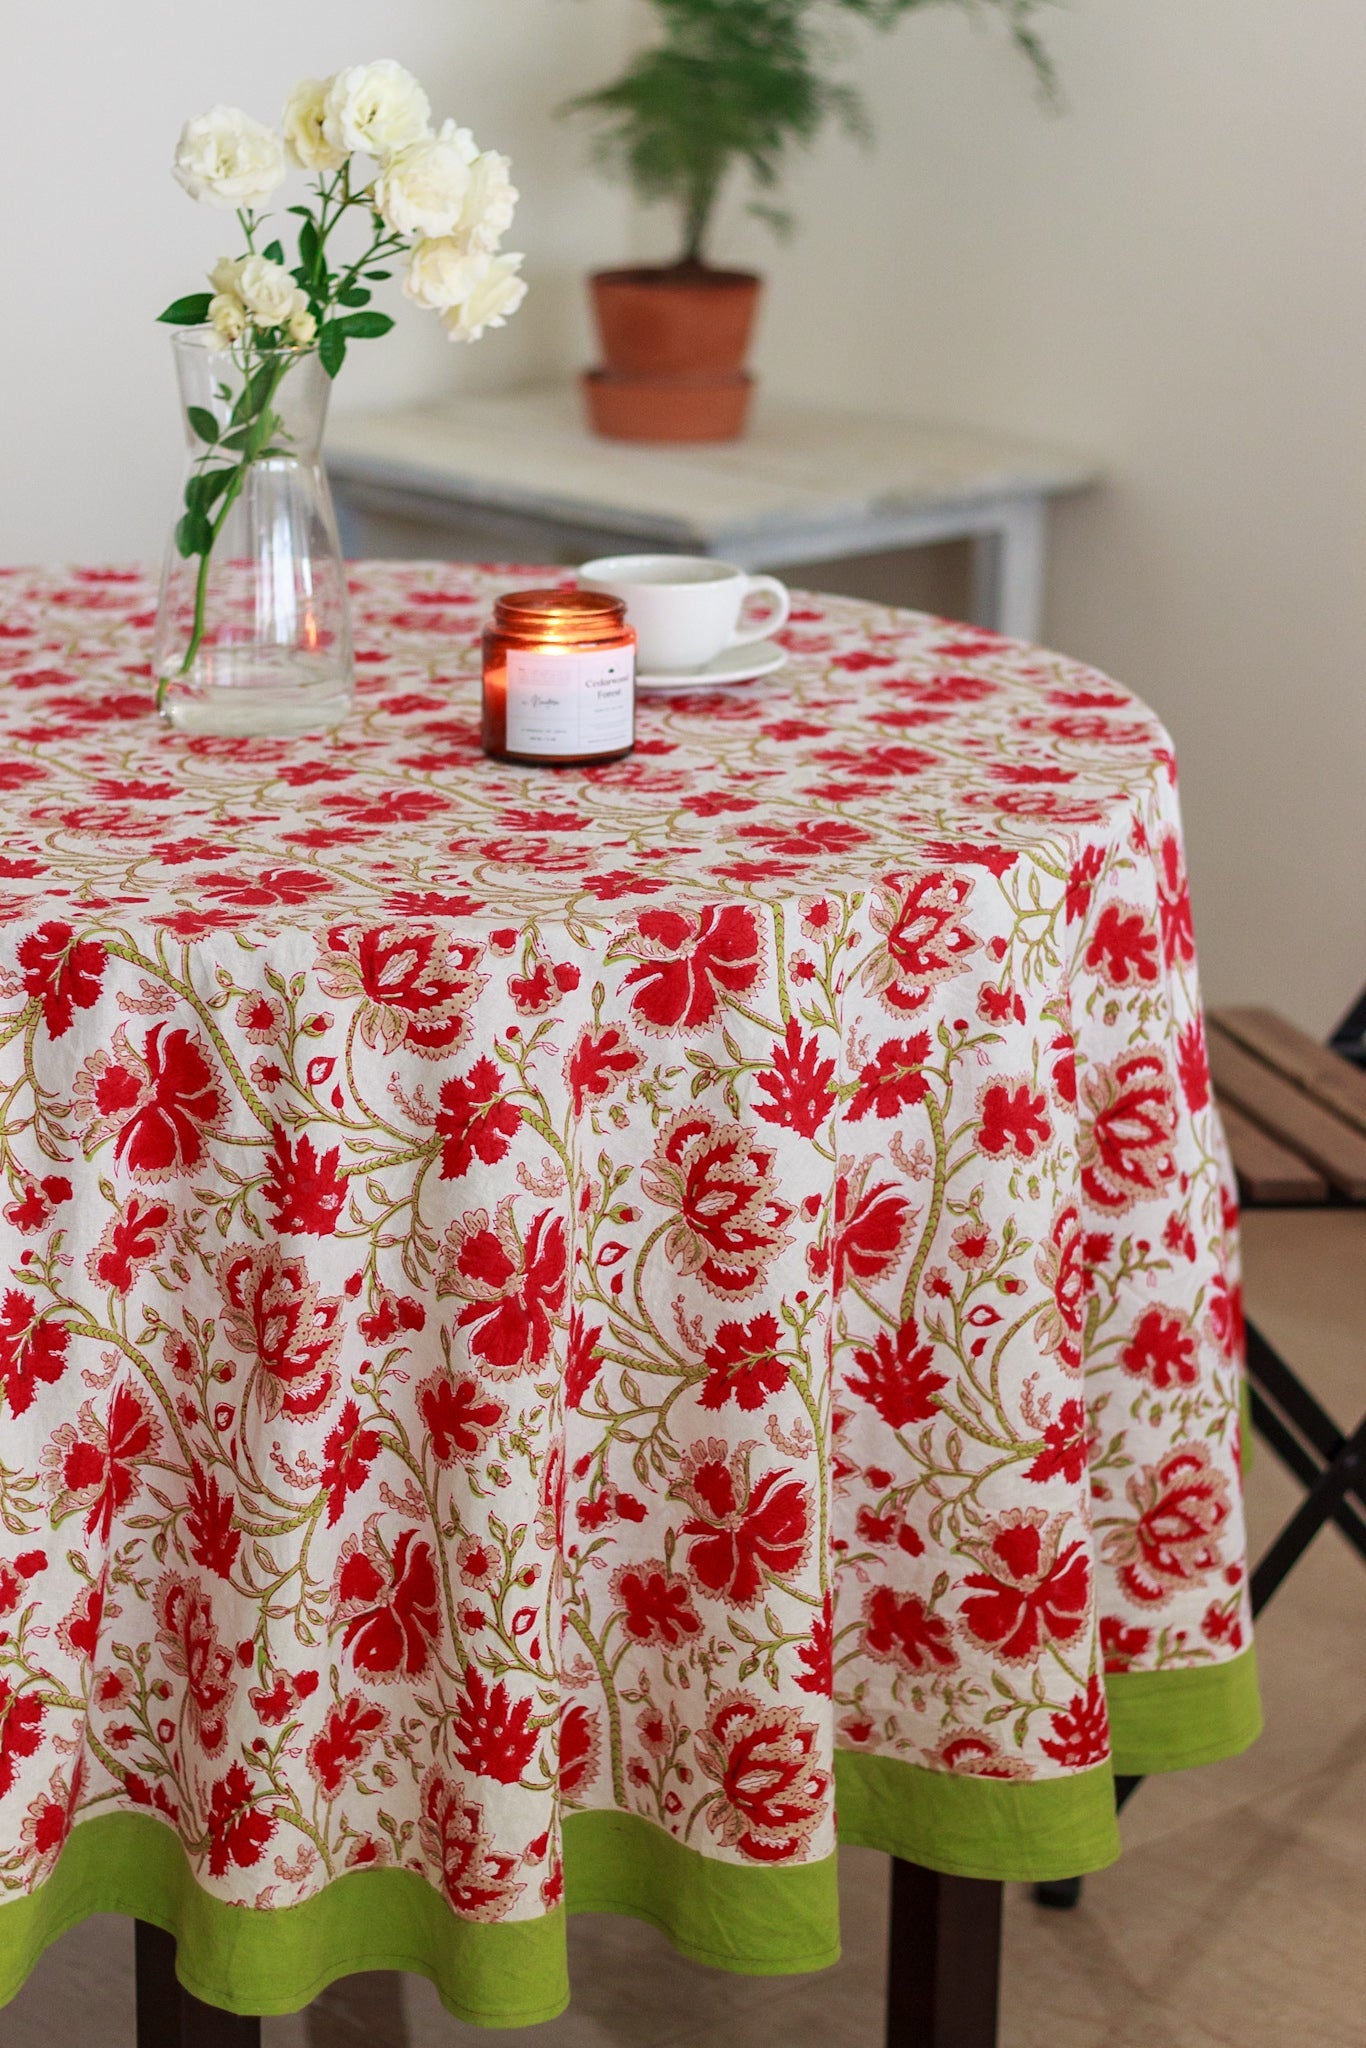 Round tablecloth - 6 & 8 seater block print table cloth - Red floral Round table cover - 72 inches & 90 inches diameter